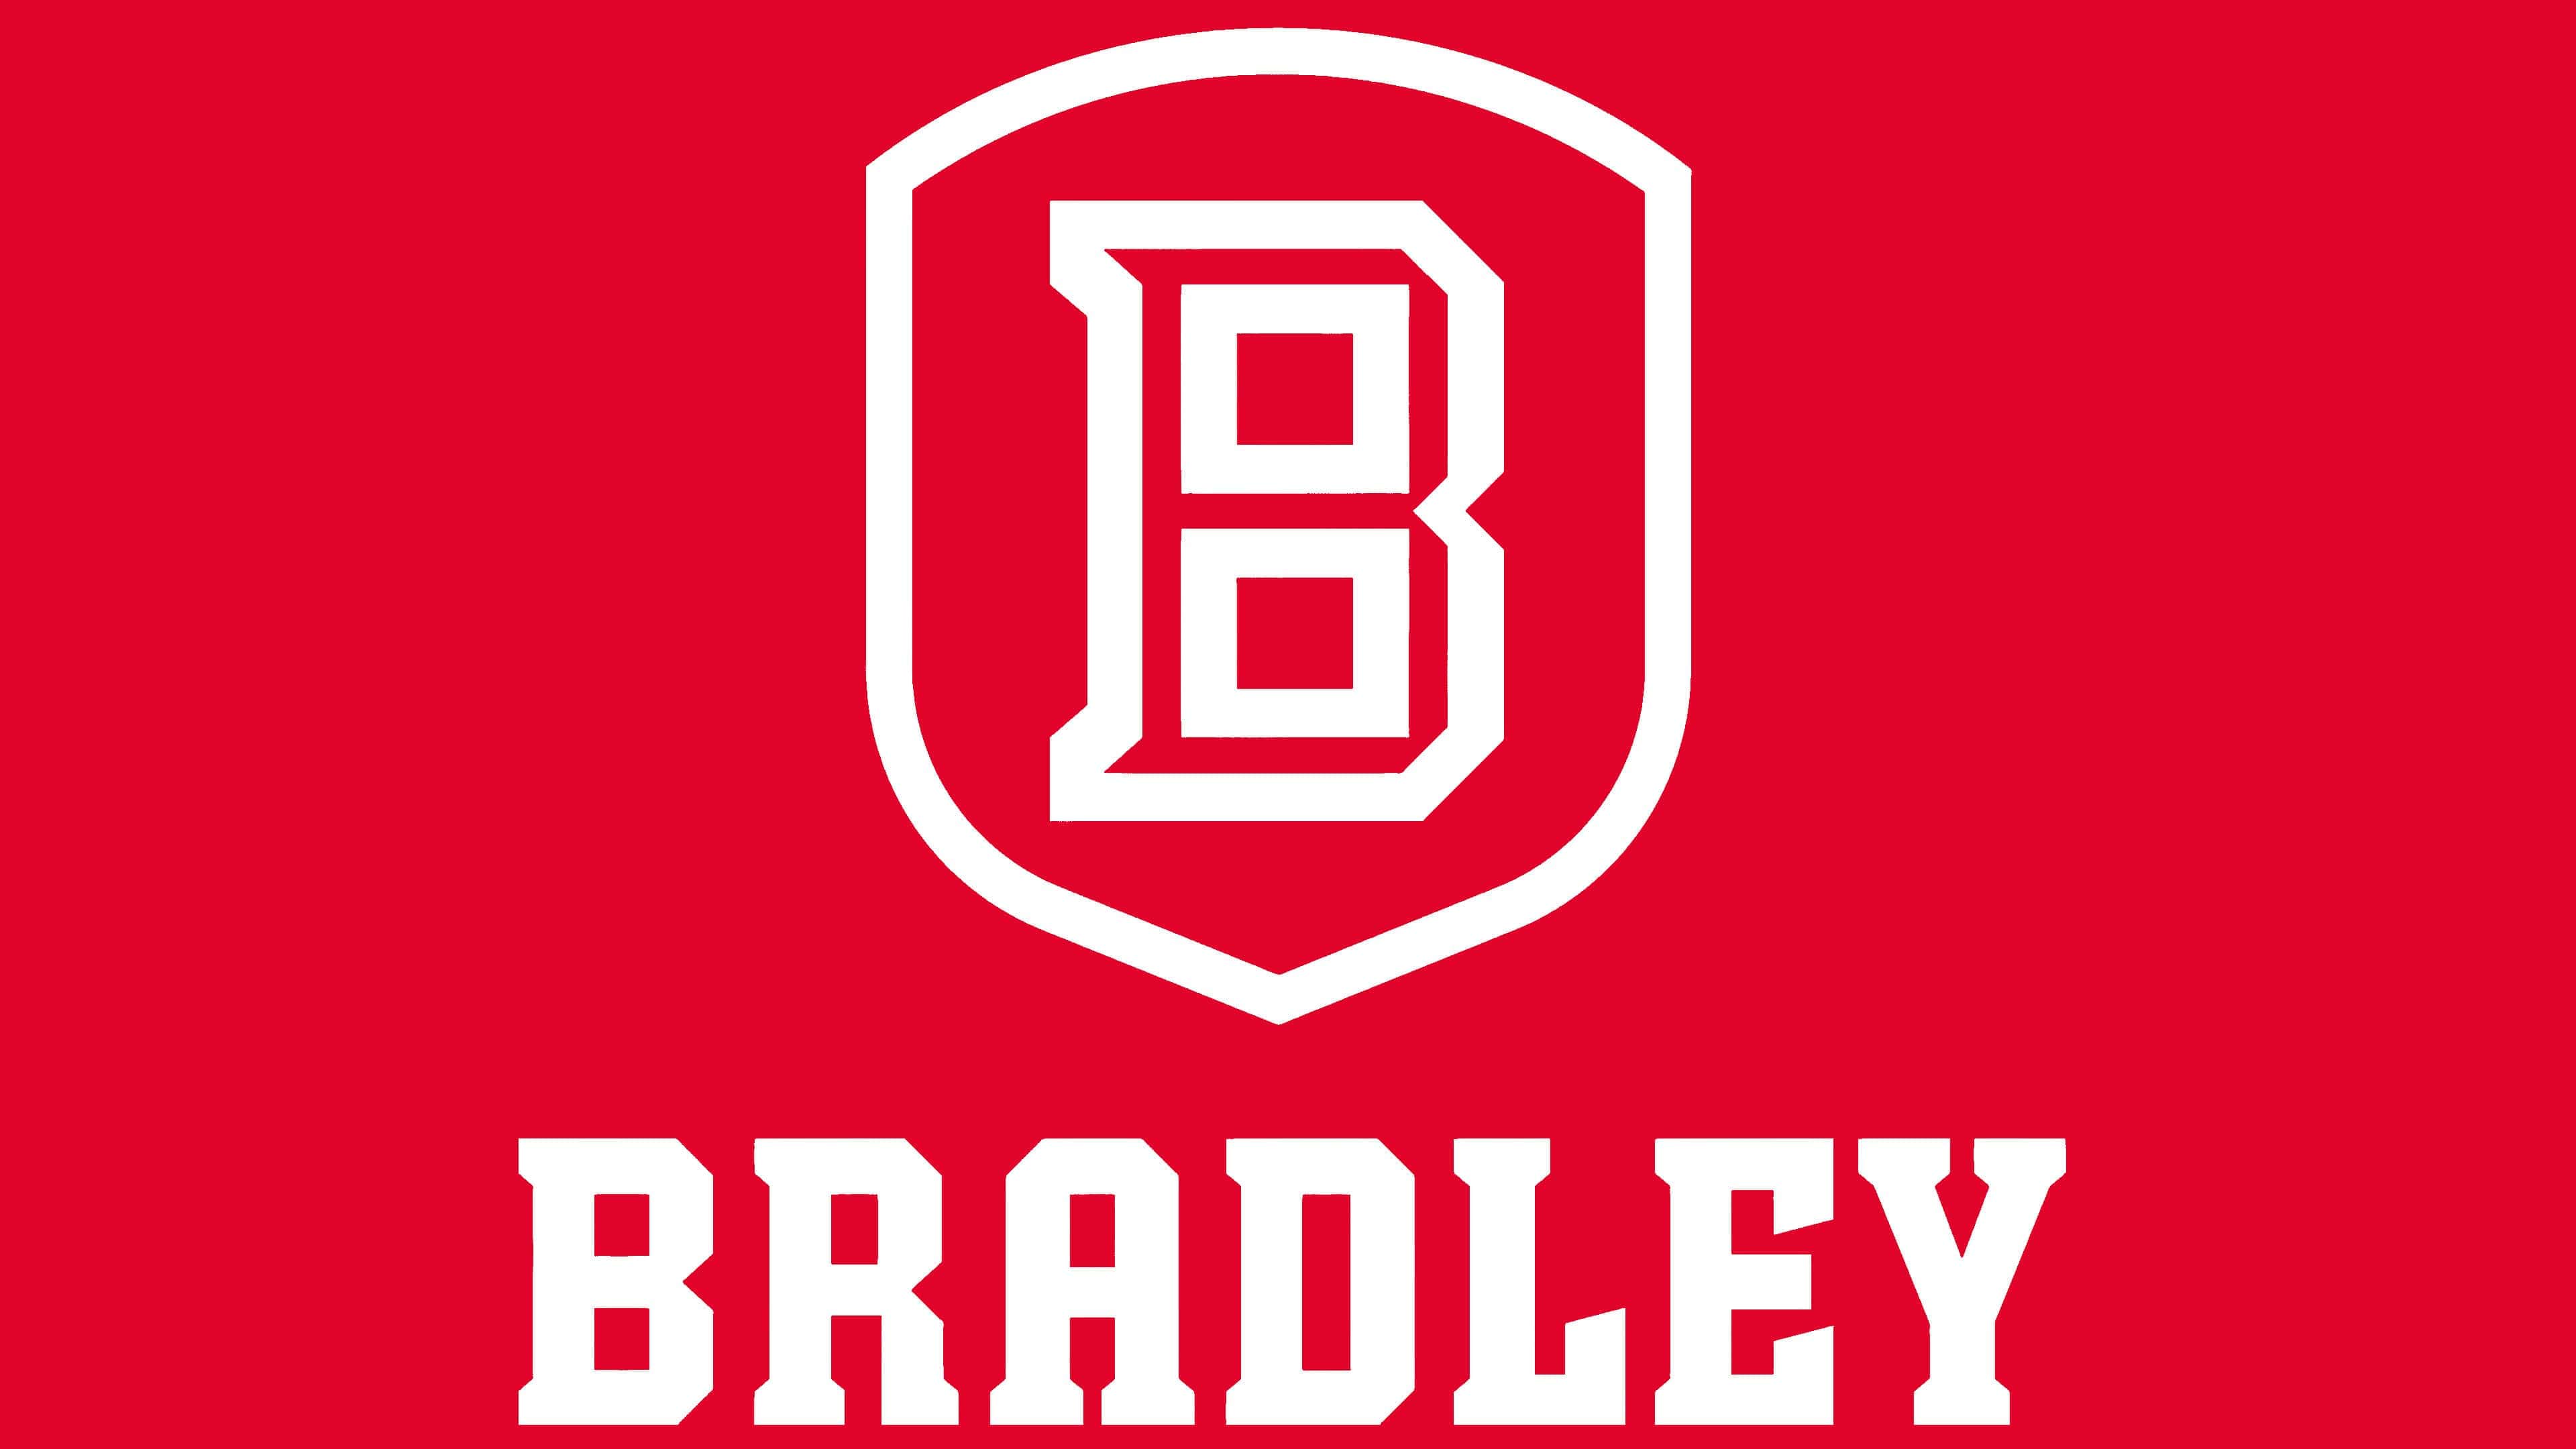 Bradley Braves Logo | The most famous brands and company logos in the world